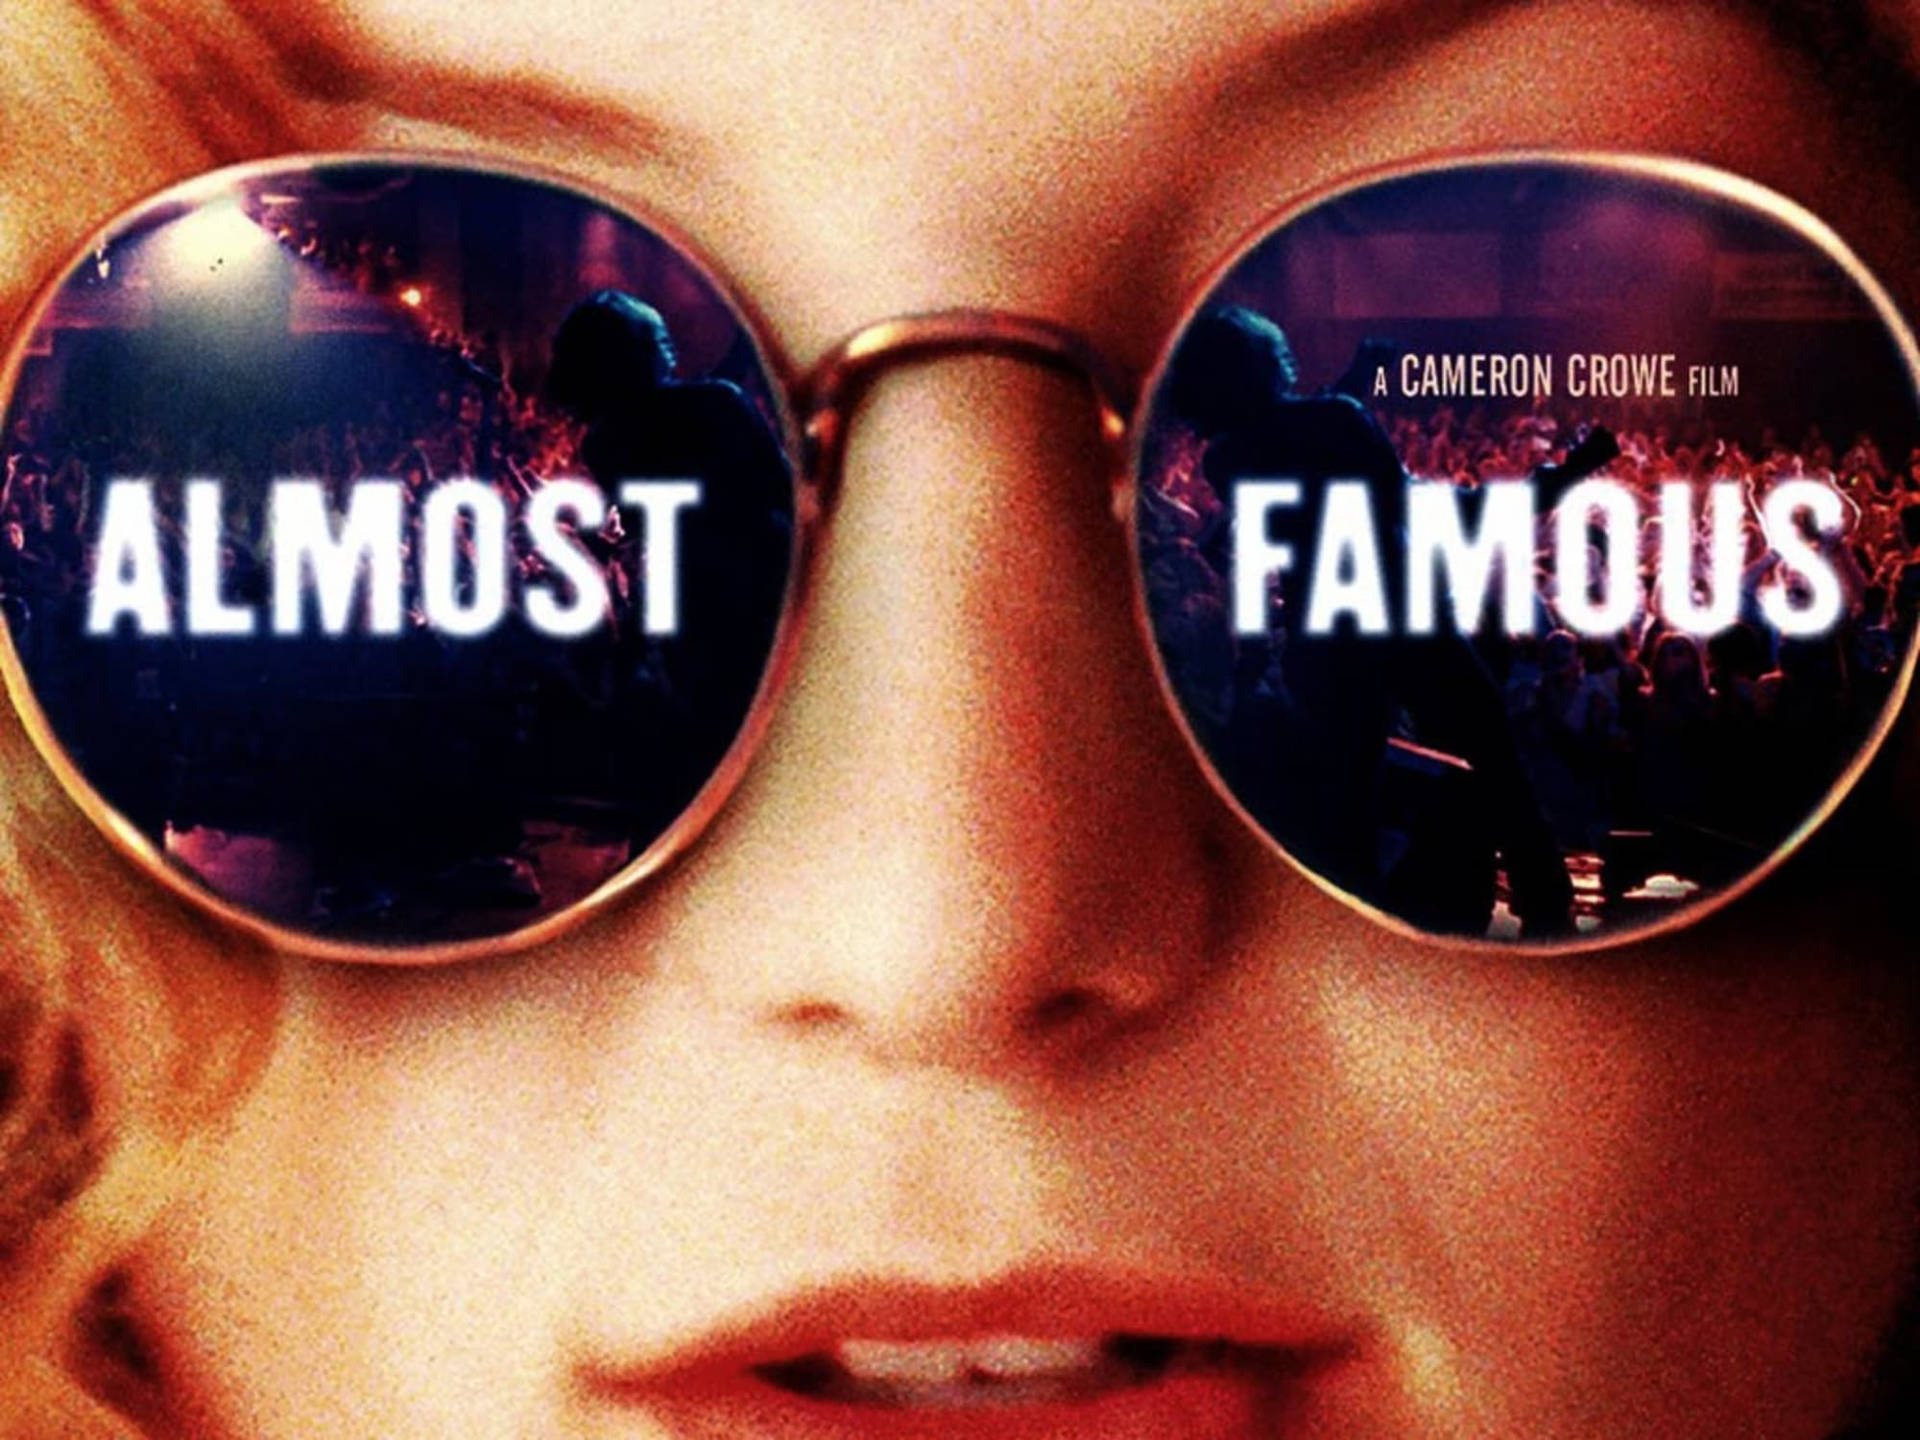 100+] Almost Famous Wallpapers | Wallpapers.com